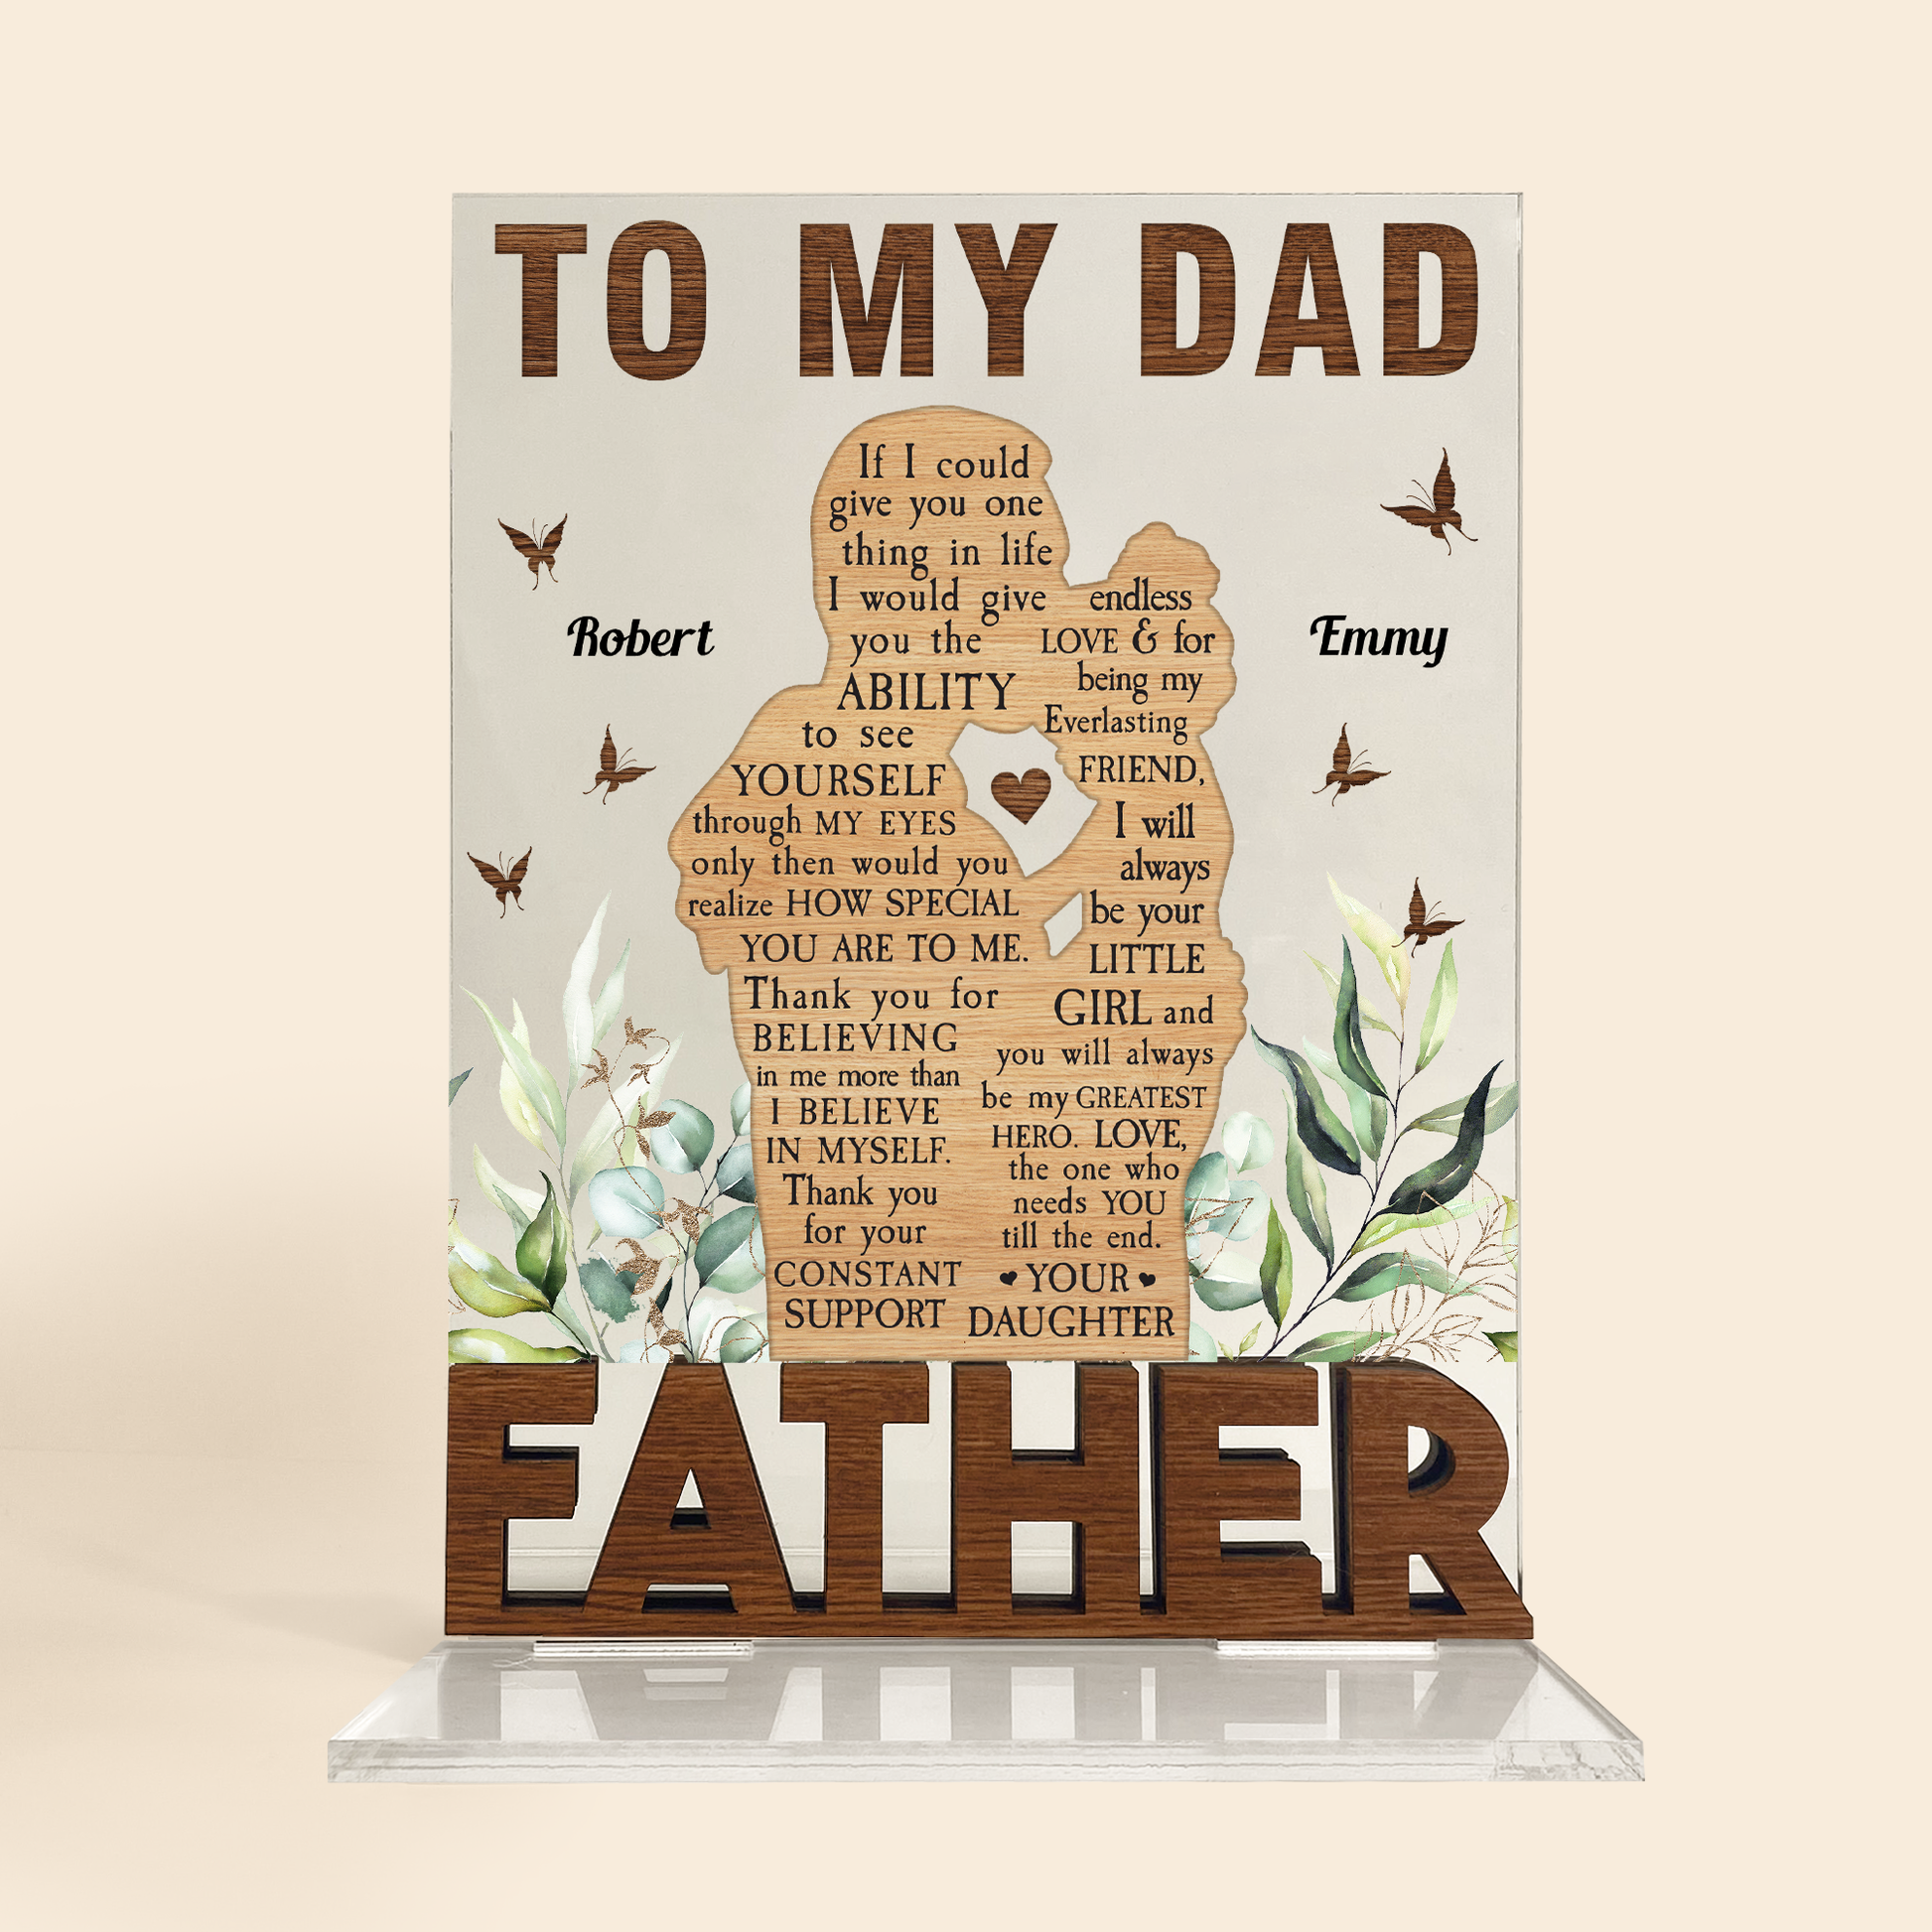 I'm Always Your Little Girl & You're Always My Greatest Hero, Dad - Personalized Acrylic Plaque With Standing Wood Letters - Father's Day, Appreciate Gift For Dad, Father, Daddy, Husband - From Daughters, Wife